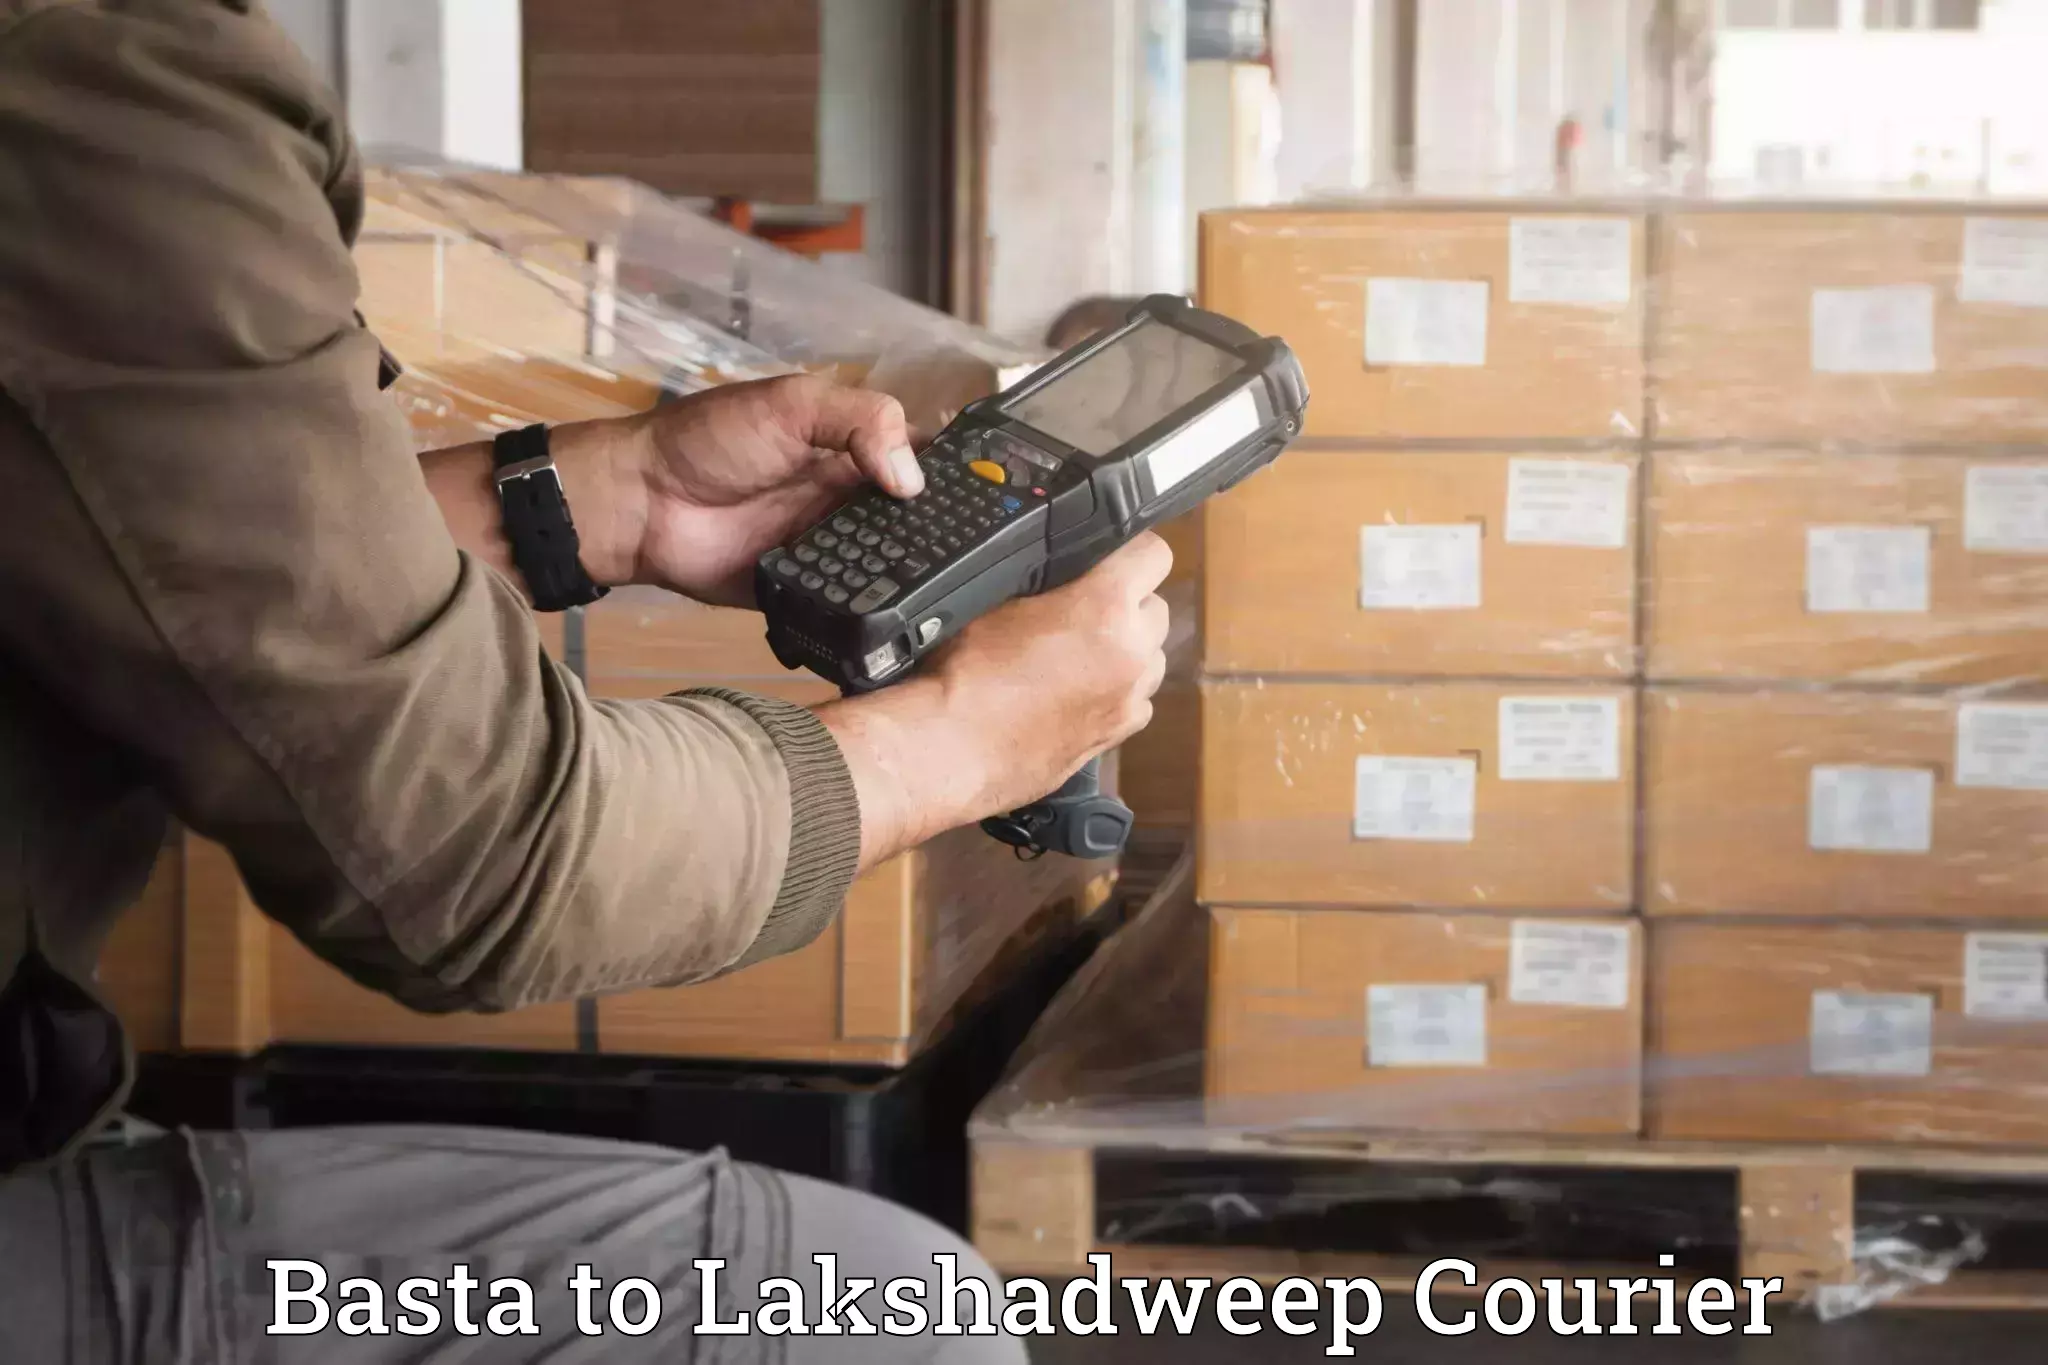 Furniture delivery service Basta to Lakshadweep